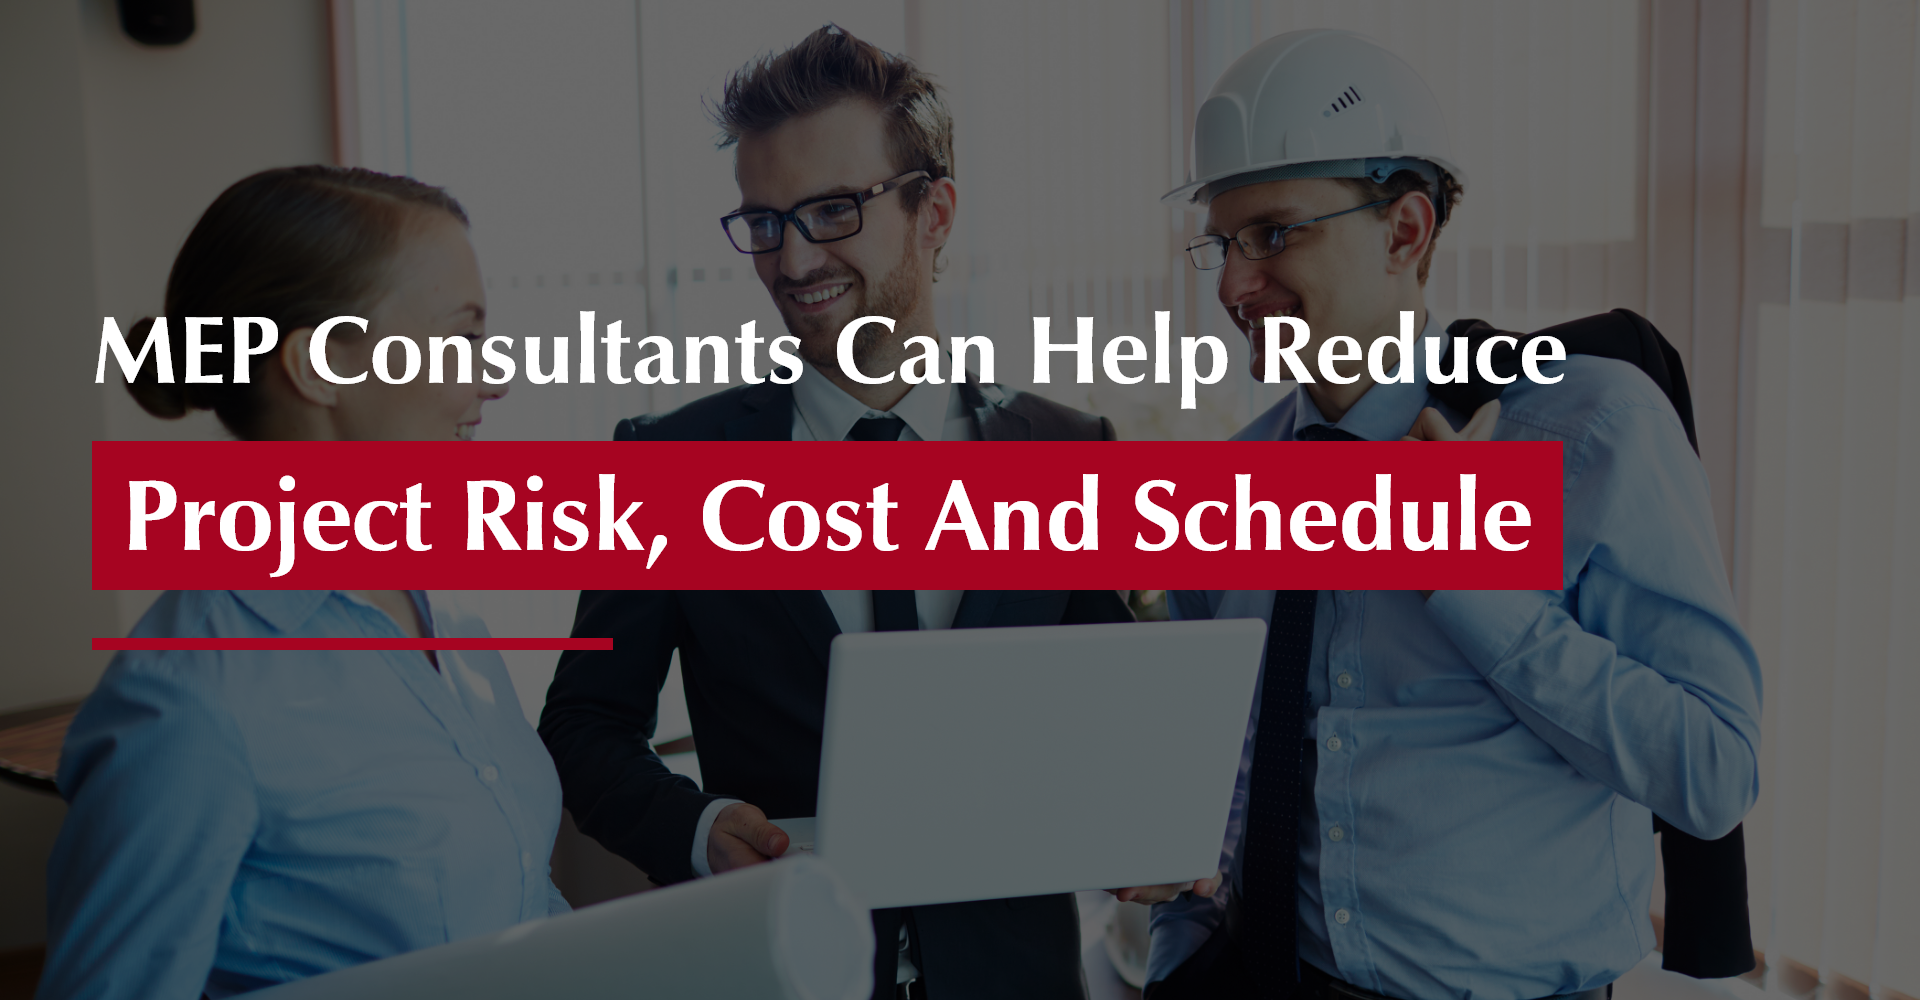 MEP consultants can help reduce project risk, Cost and Schedule